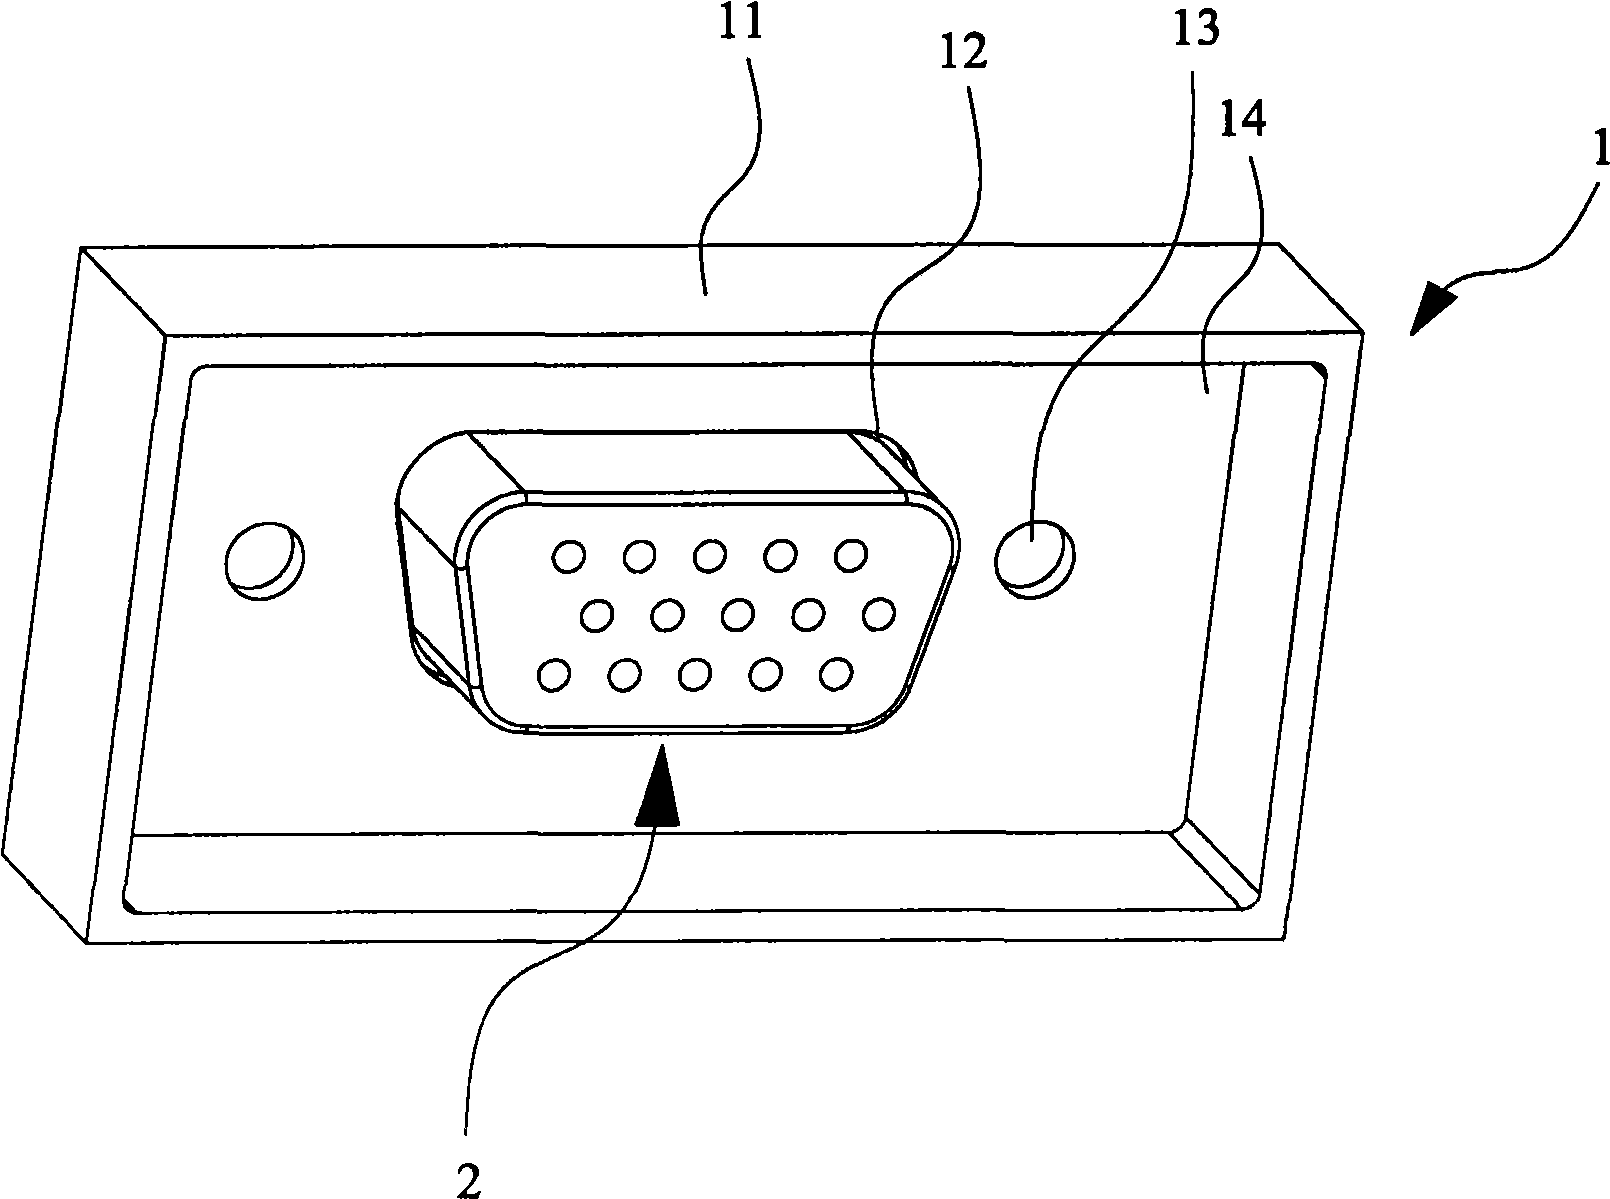 Notebook computer and waterproof sealing structure used for port connection